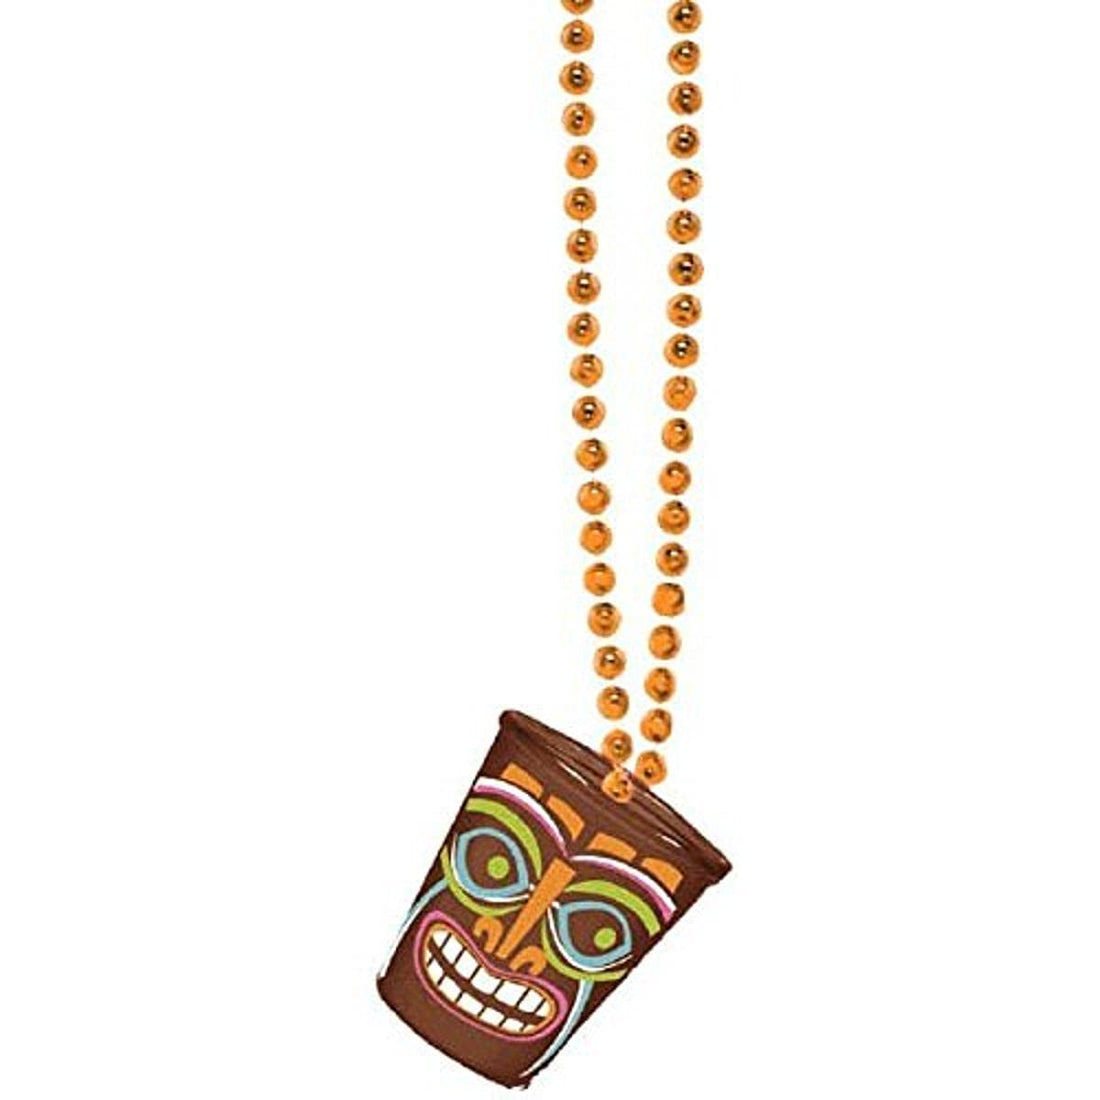 Amscan Hawaiian Tiki Shot Glass Necklace-1pc, Multicolor, 1 Count (Pack of 1)